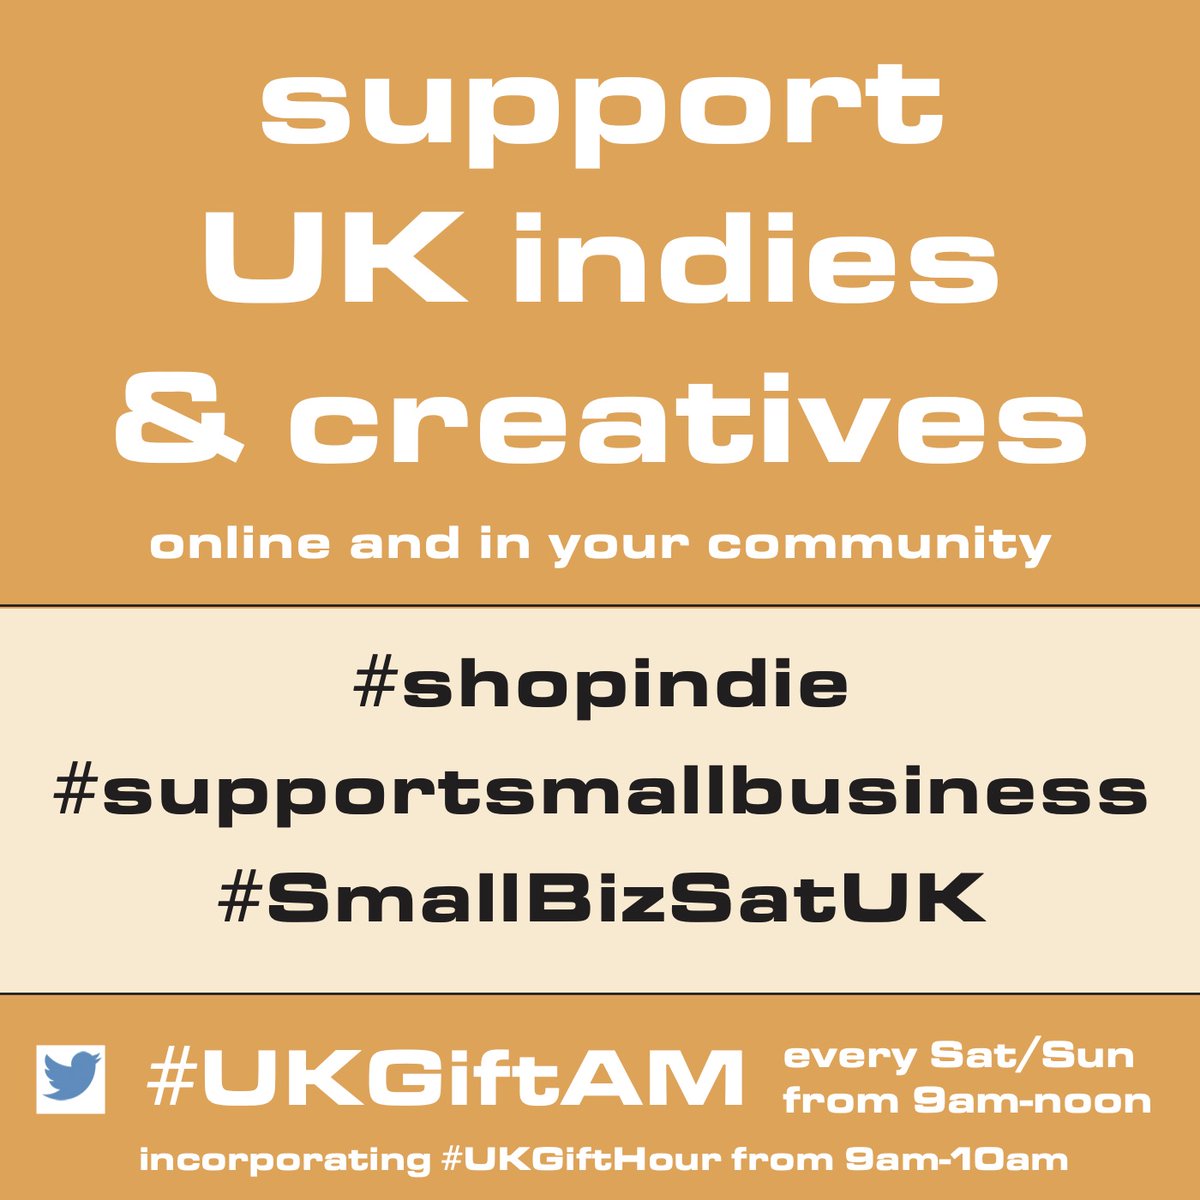 If you're in the market for #giftideas with a difference If you want to #supportsmallbusiness #UKGiftHour #UKGiftAM with #shopindie creatives is here on @SmallBizSatUK tomorrow! Selling, buying, browsing or chatting - all welcome 🤗 Hashtag #SmallBizSatUK too #EarlyBiz